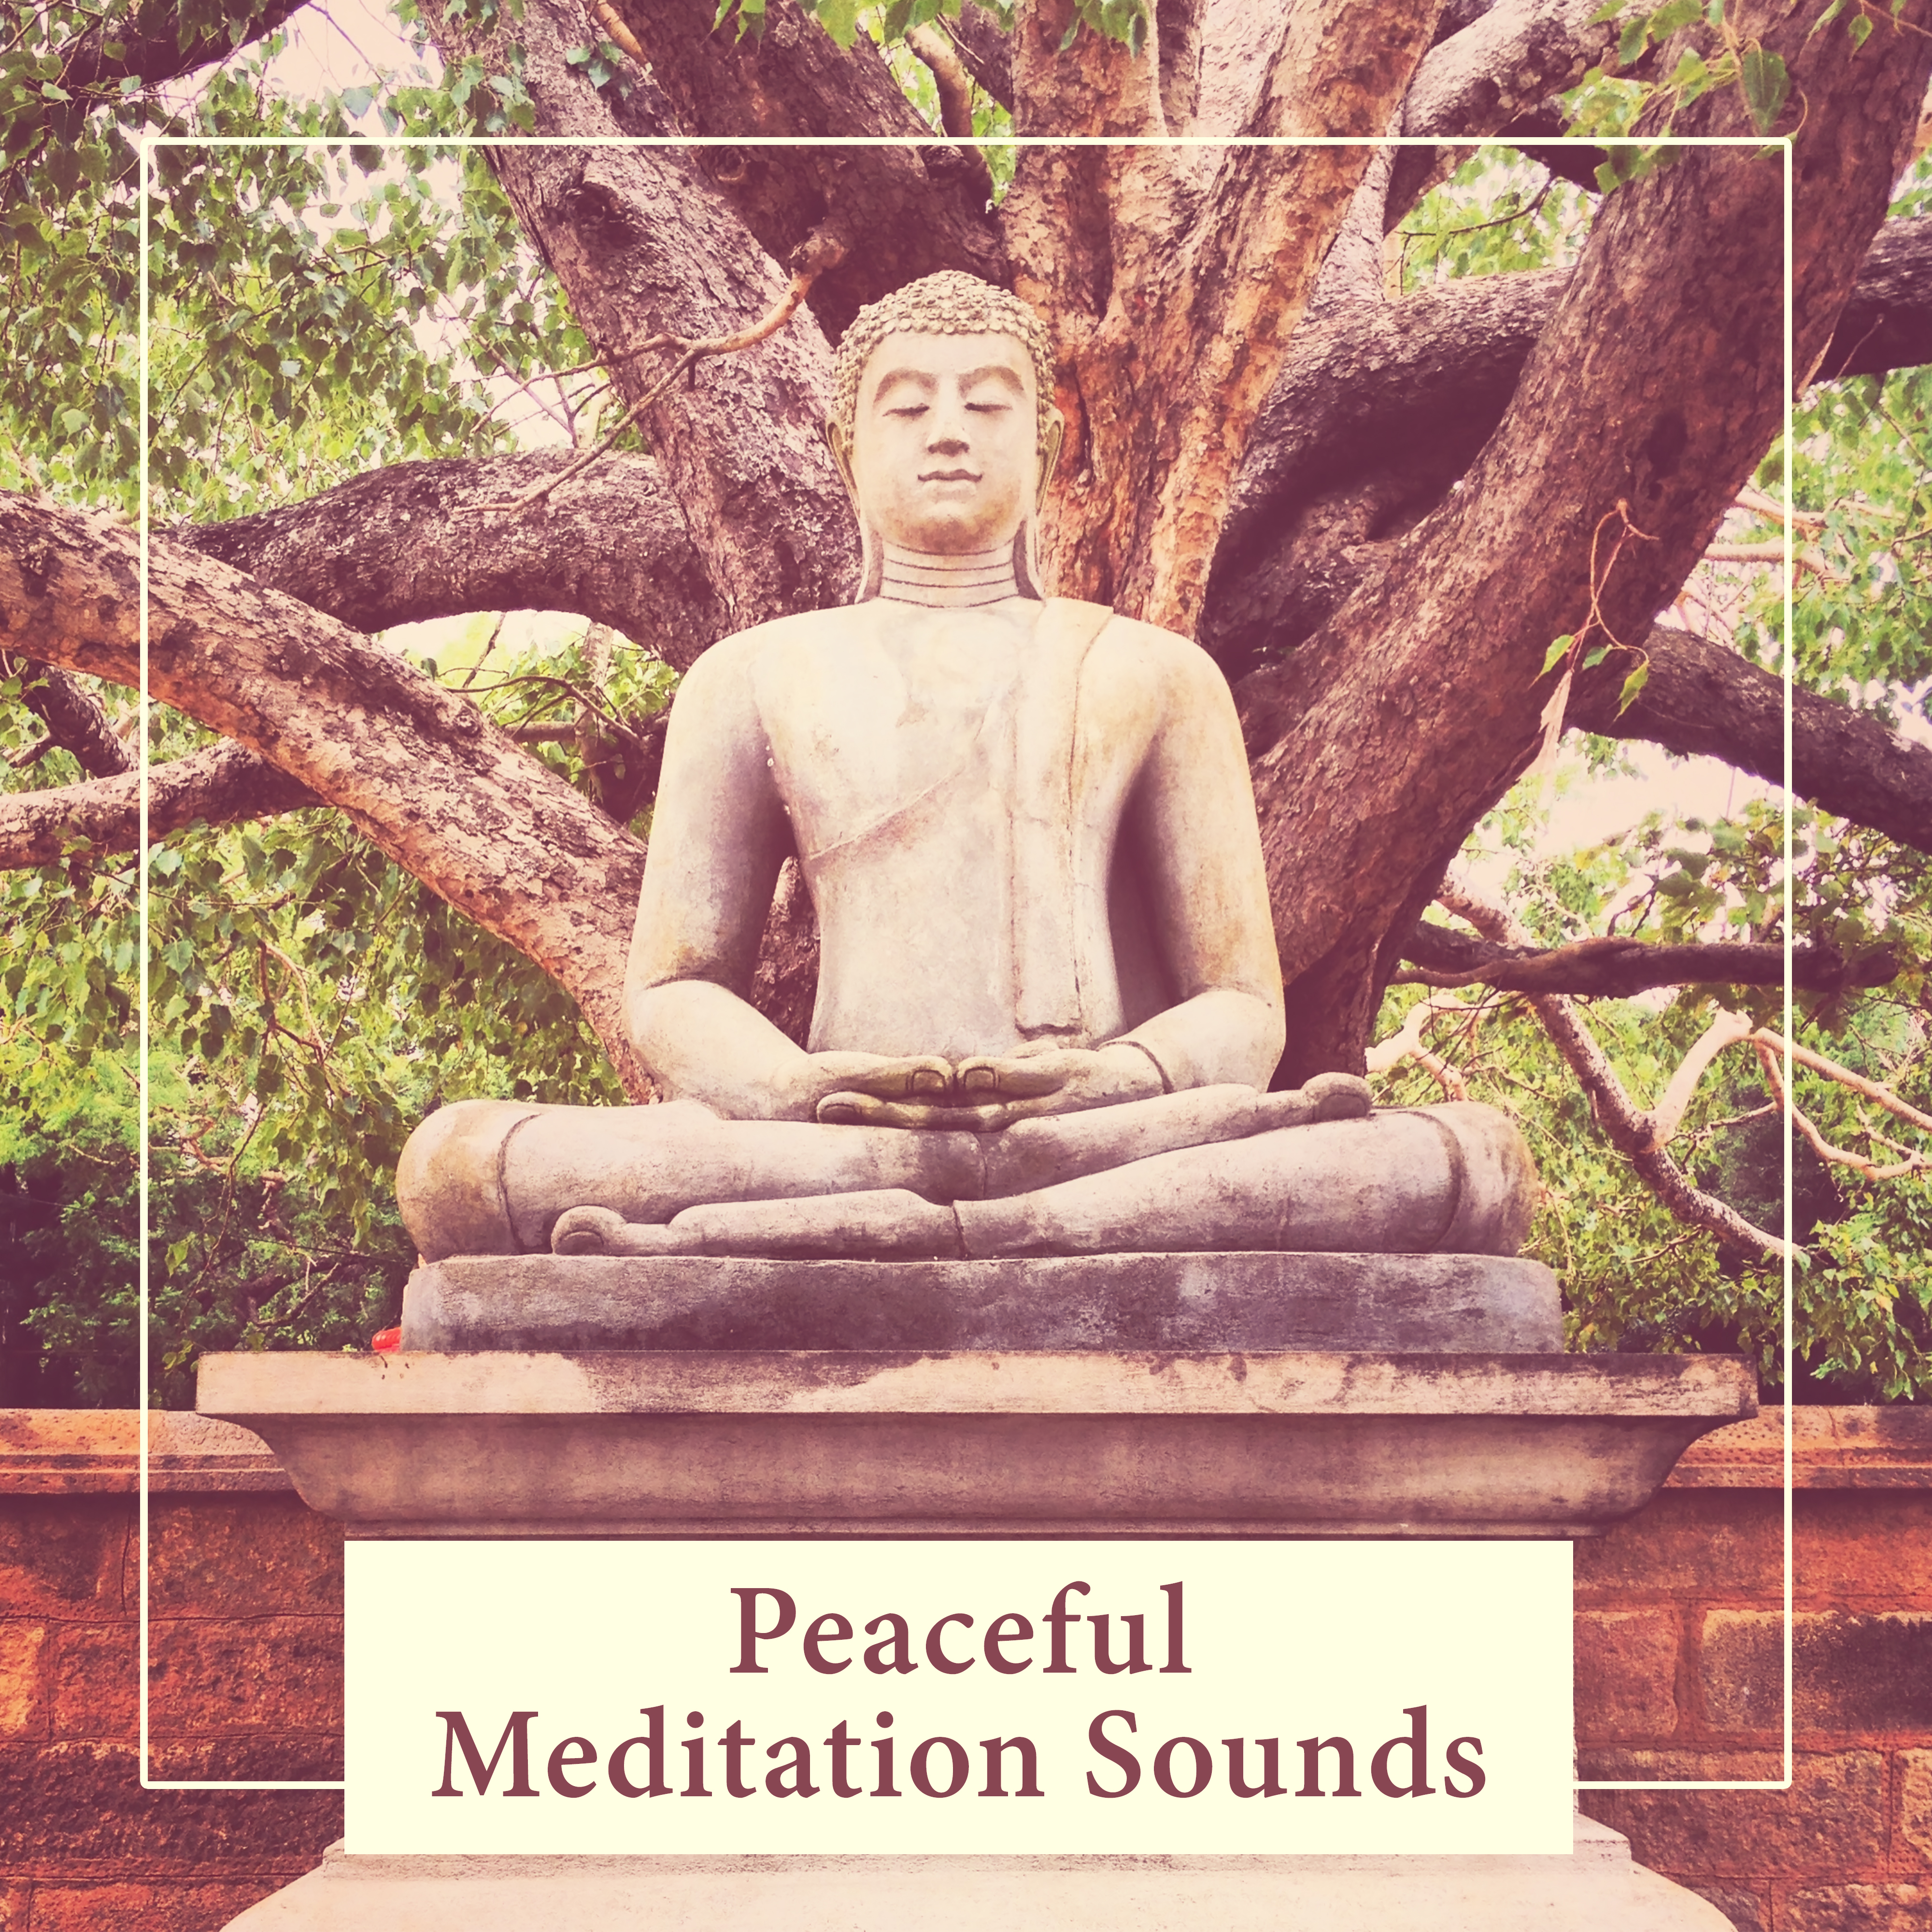 Peaceful Meditation Sounds – Soft New Age Sounds to Meditate, Relaxing Music, Spirit Free, Inner Calmness